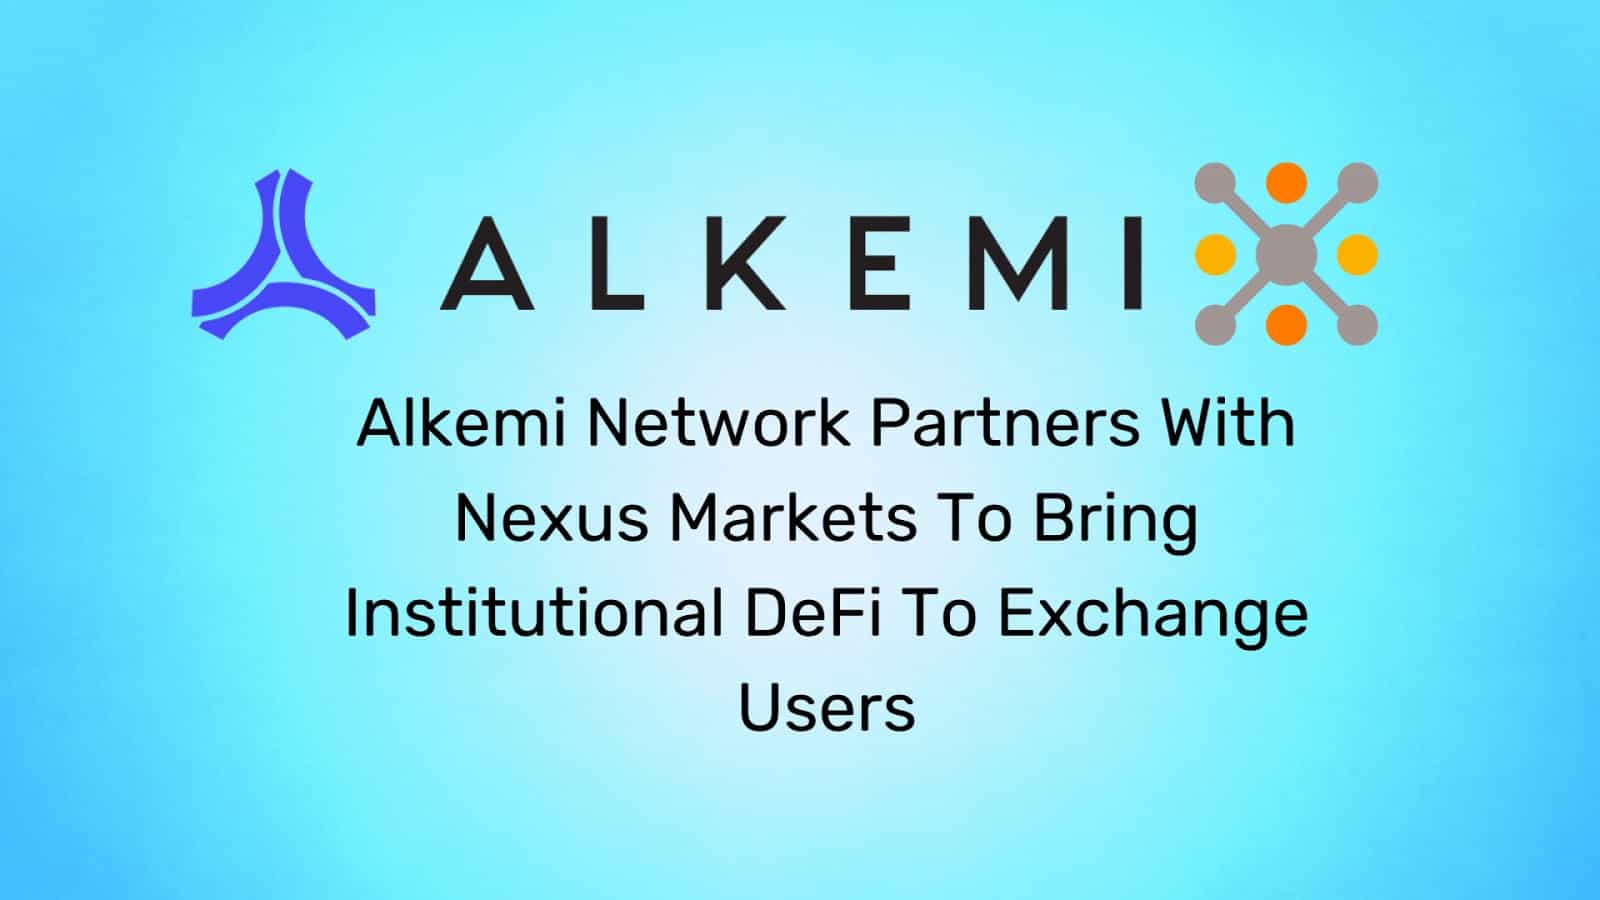 Alkemi-network-partners-with-nexus-markets-to-bring-institutional-defi-to-exchange-users